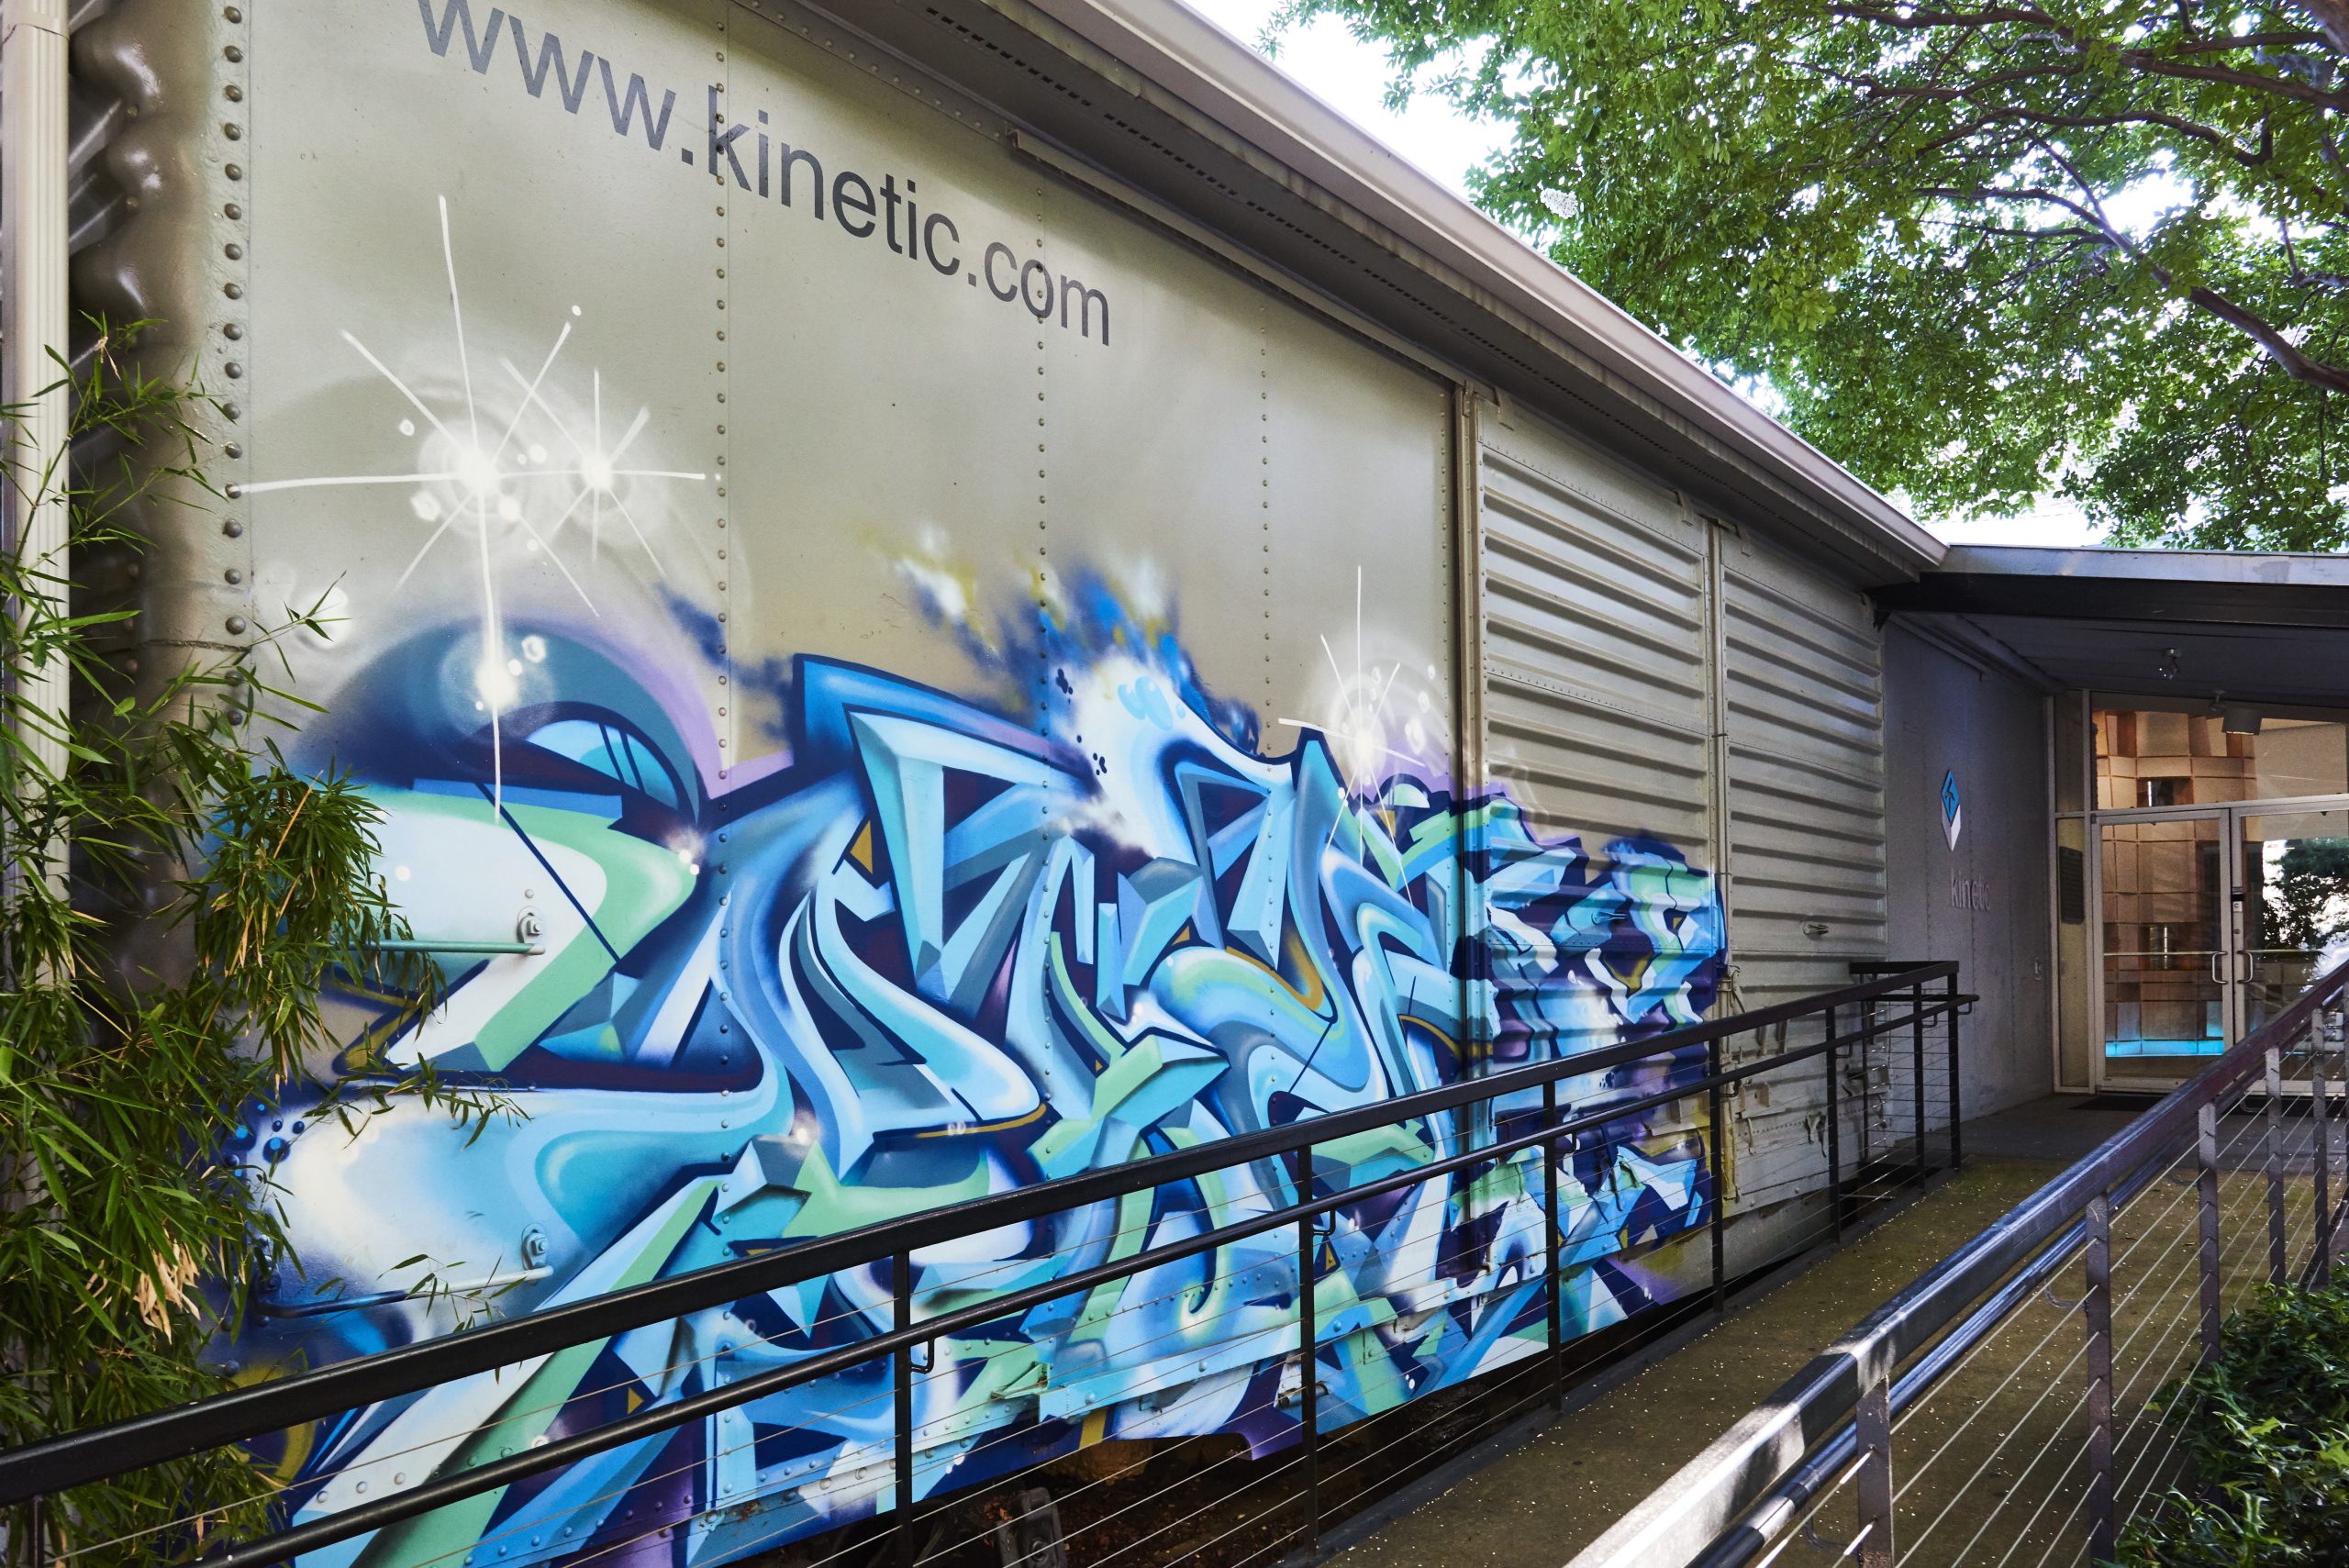 Photo of the boxcar placed along the front entrance ramp complete with artwork and web address.